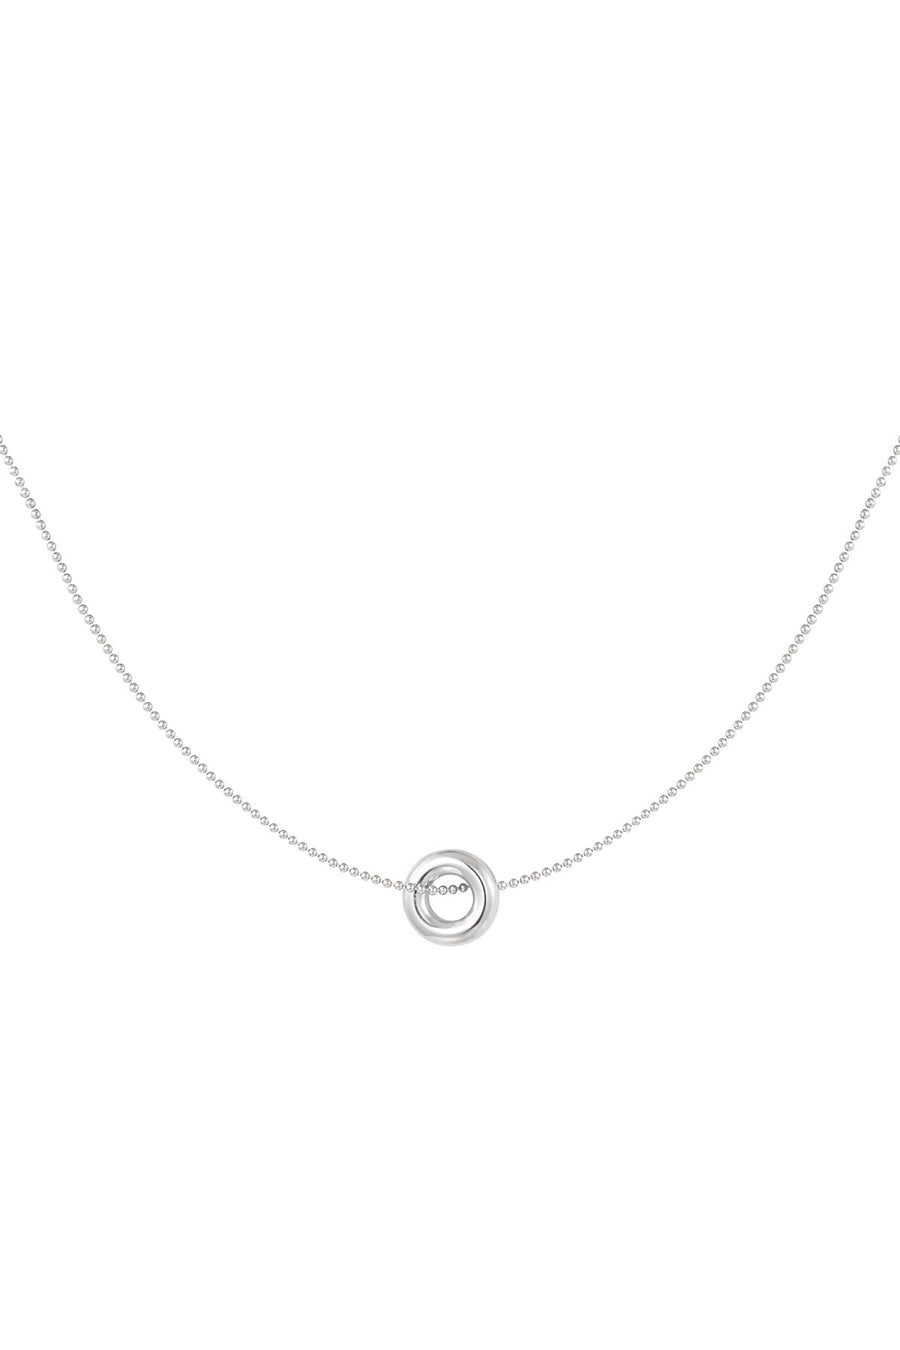 Circle Charm Necklace- Gold & Silver Available